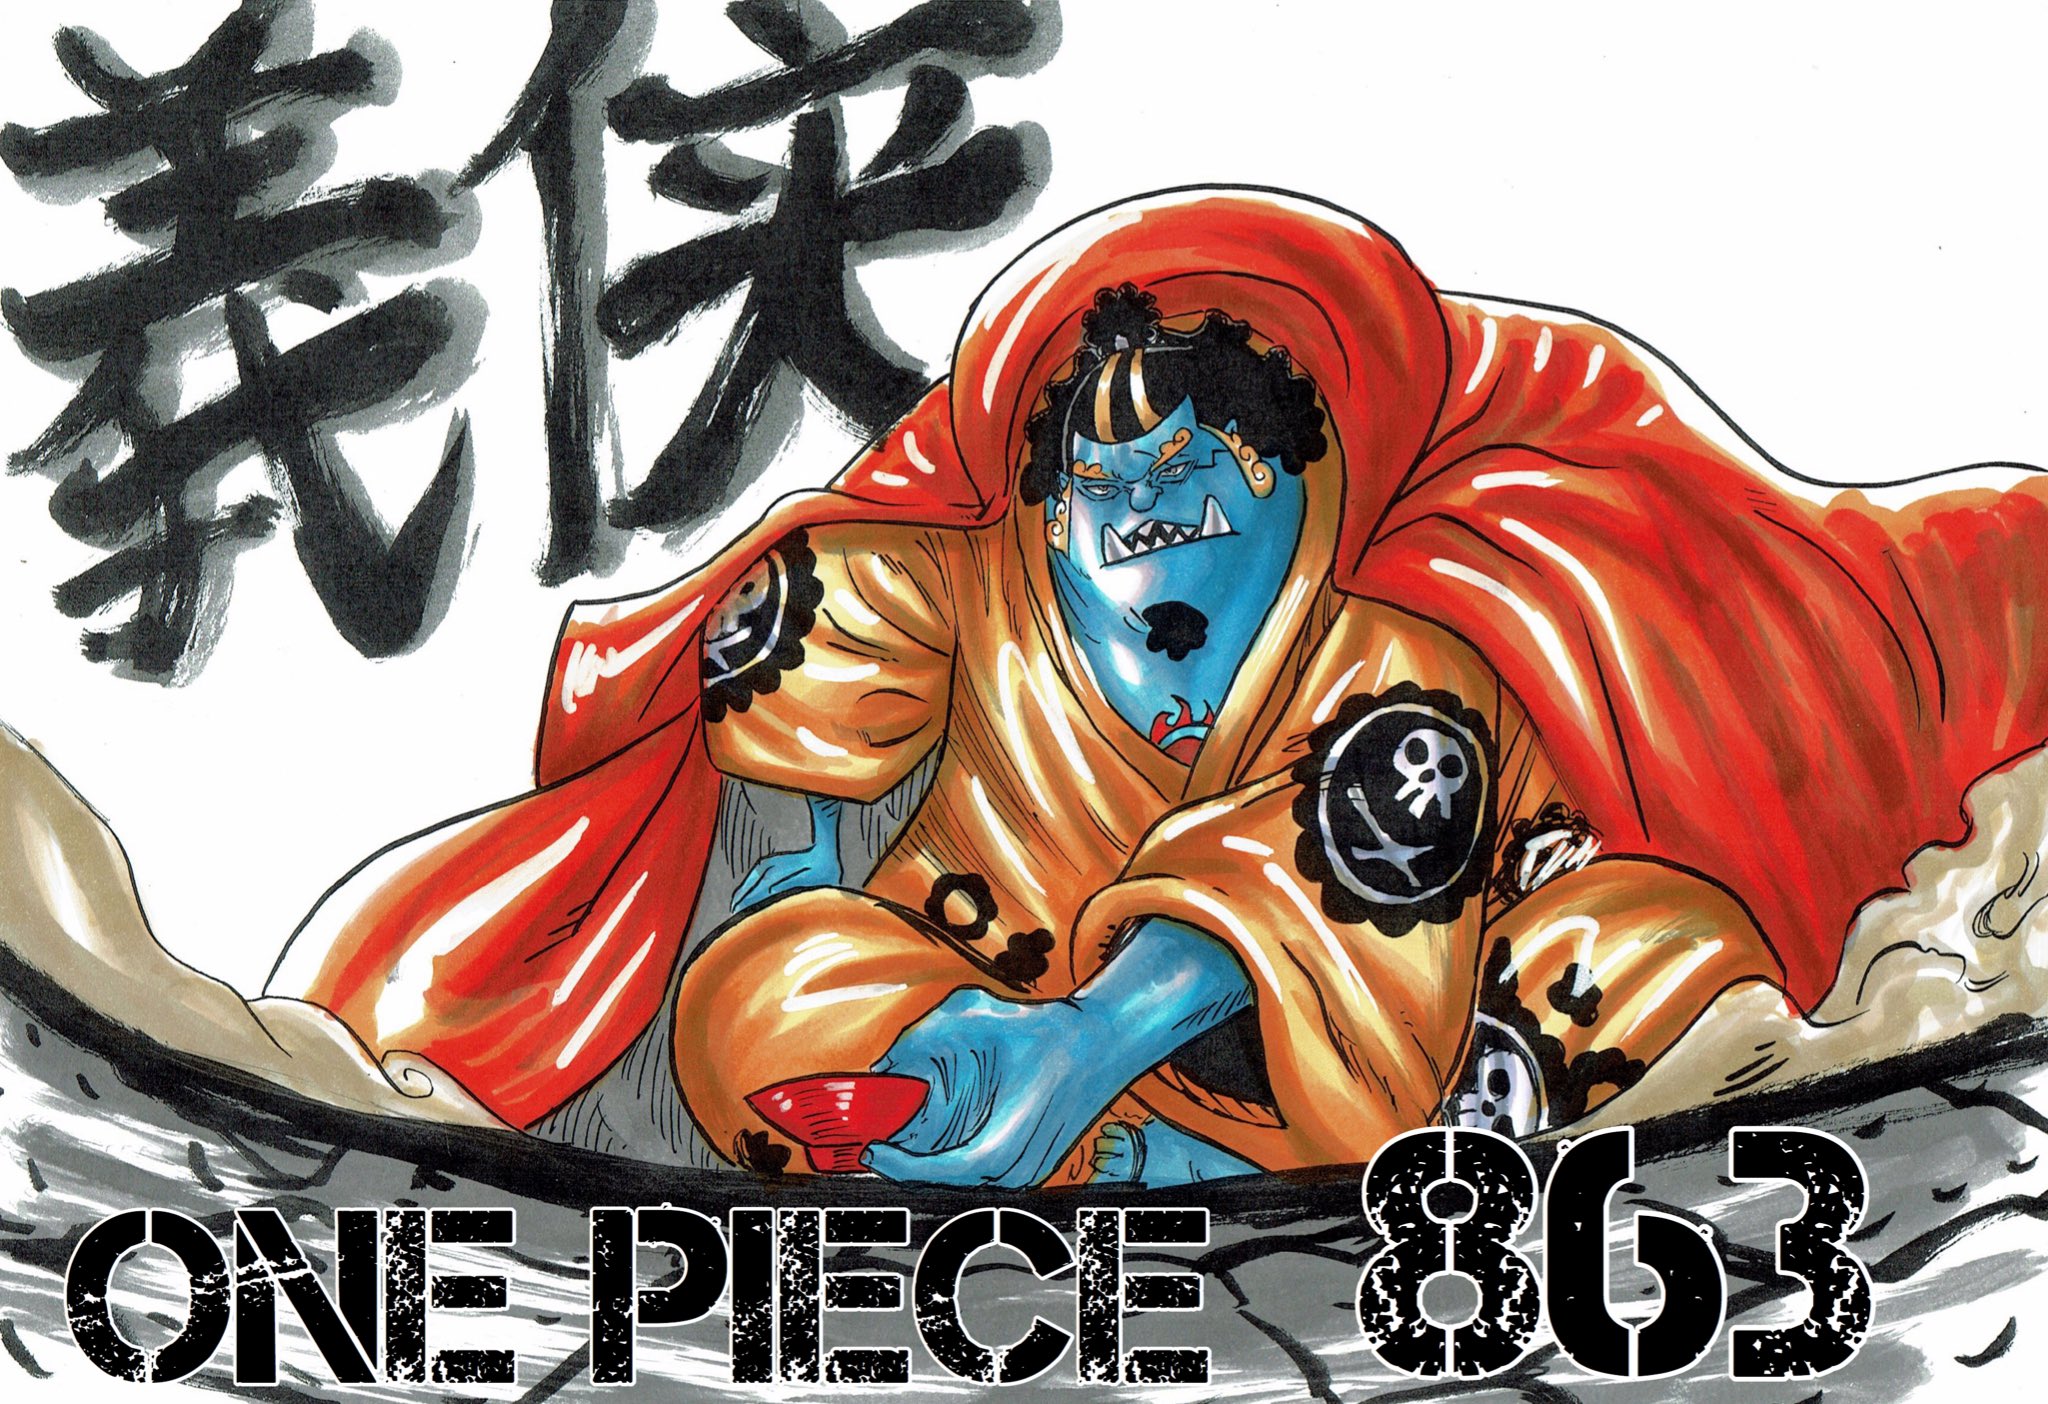 Hatsu S Colorpage どうも お世話んなりやした One Piece 第863話 義侠派 より T Co Szfxkpcou8 Twitter